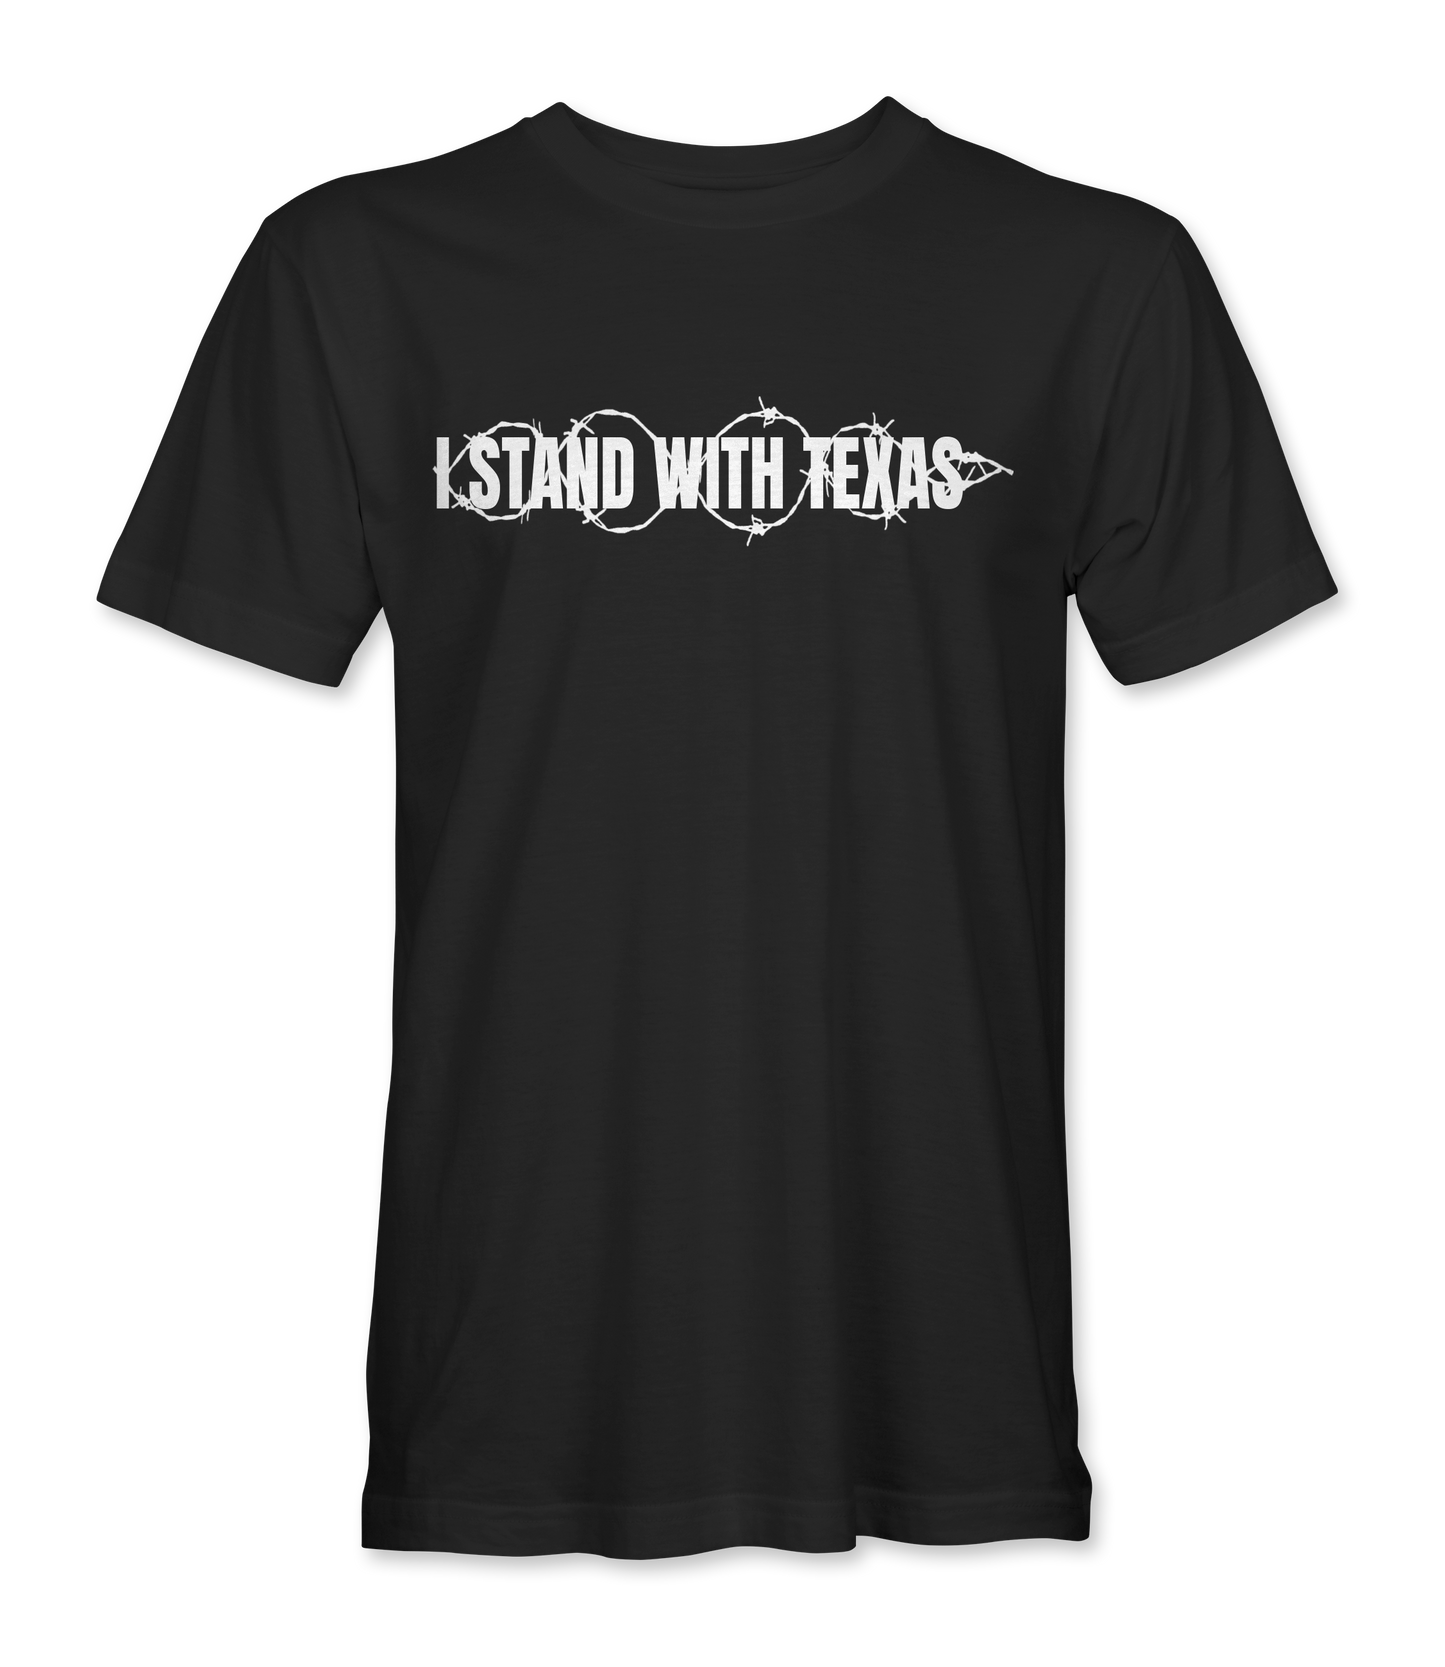 I Stand With Texas T-Shirt